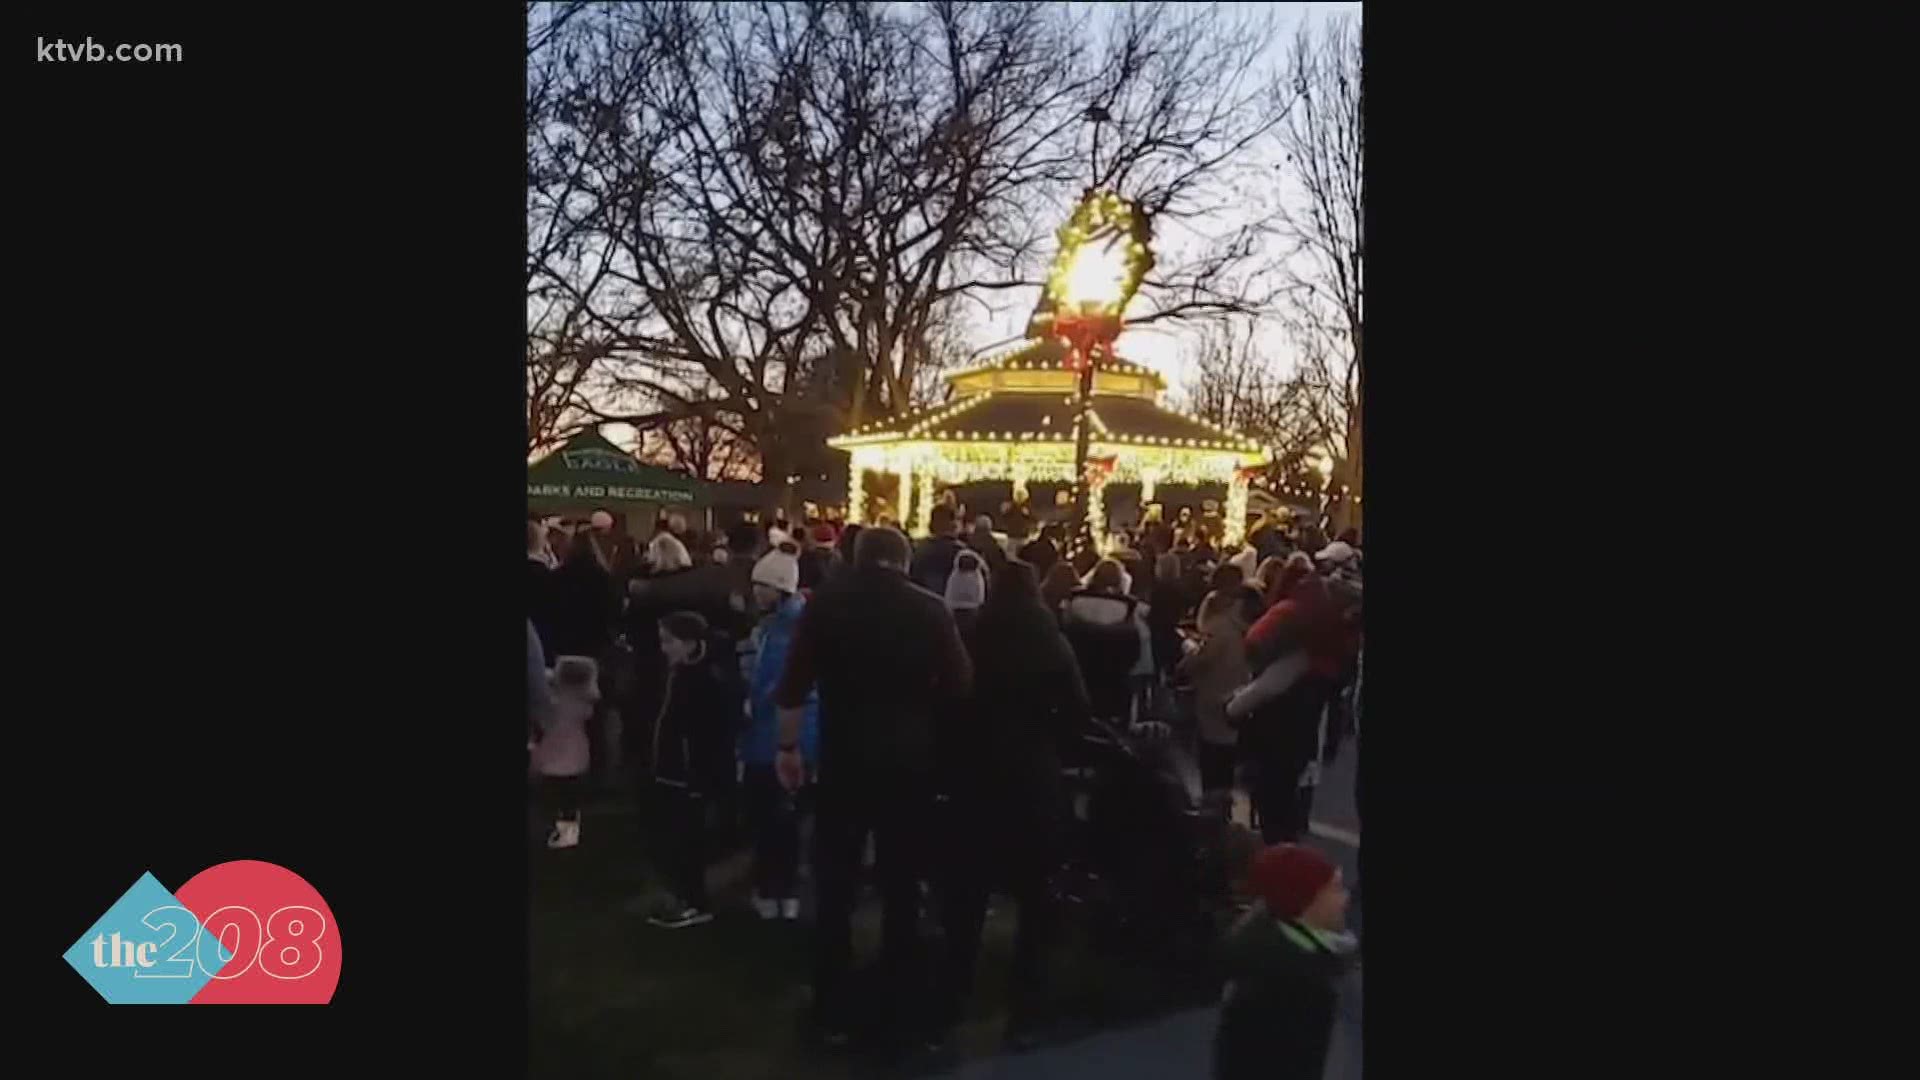 A video from the Eagle Chamber of Commerce showed hundreds of residents, many without masks, gathering for the city's annual tree lighting event.